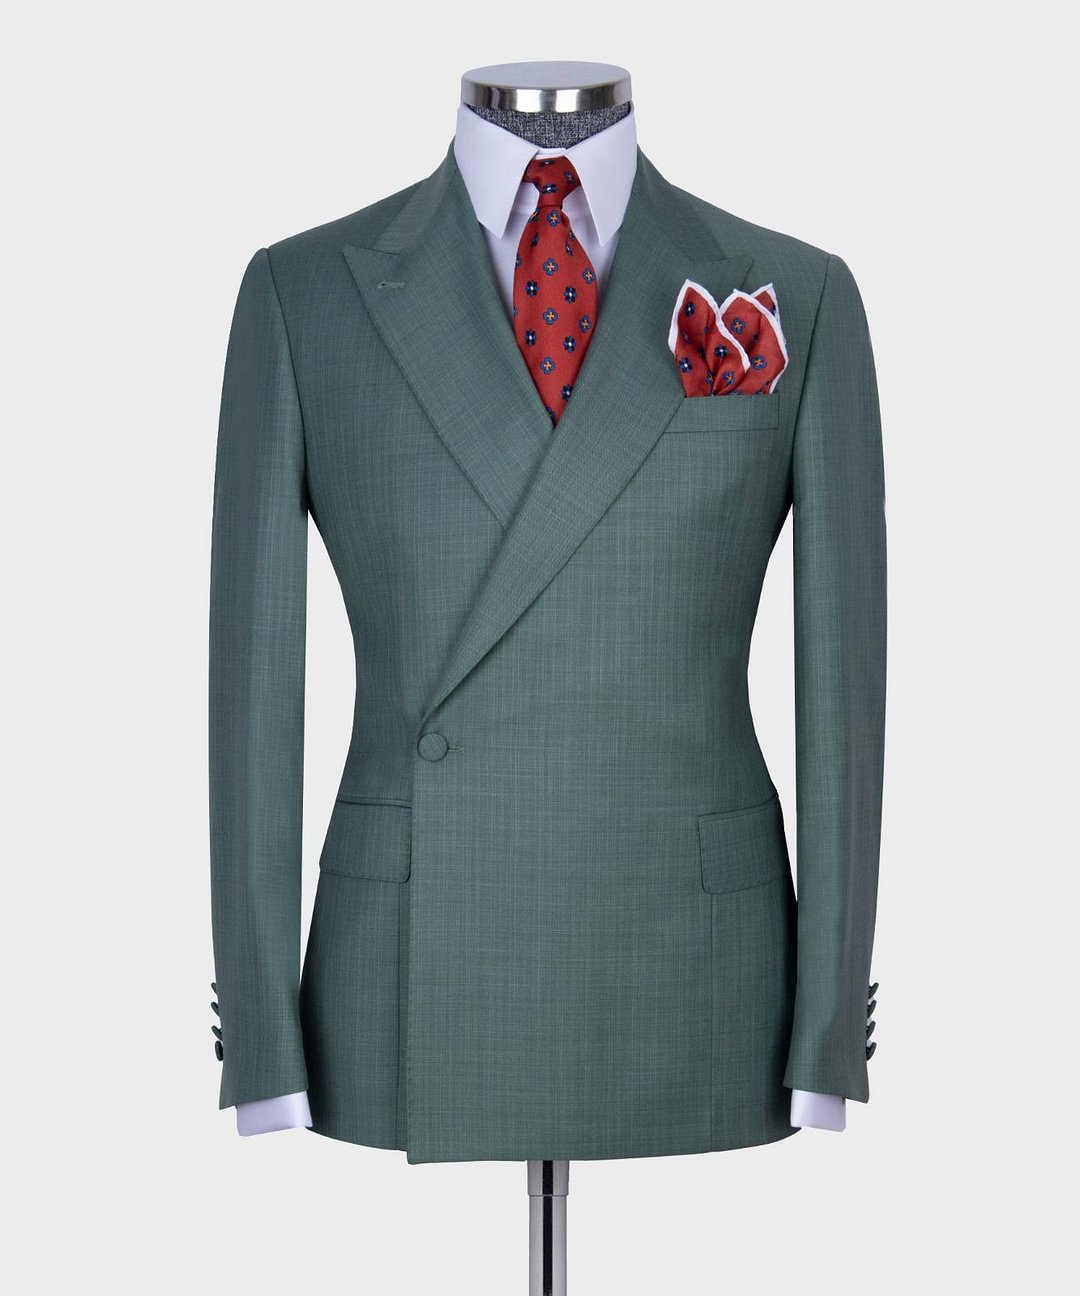 Men's light green single button double breasted 2pcs suit.